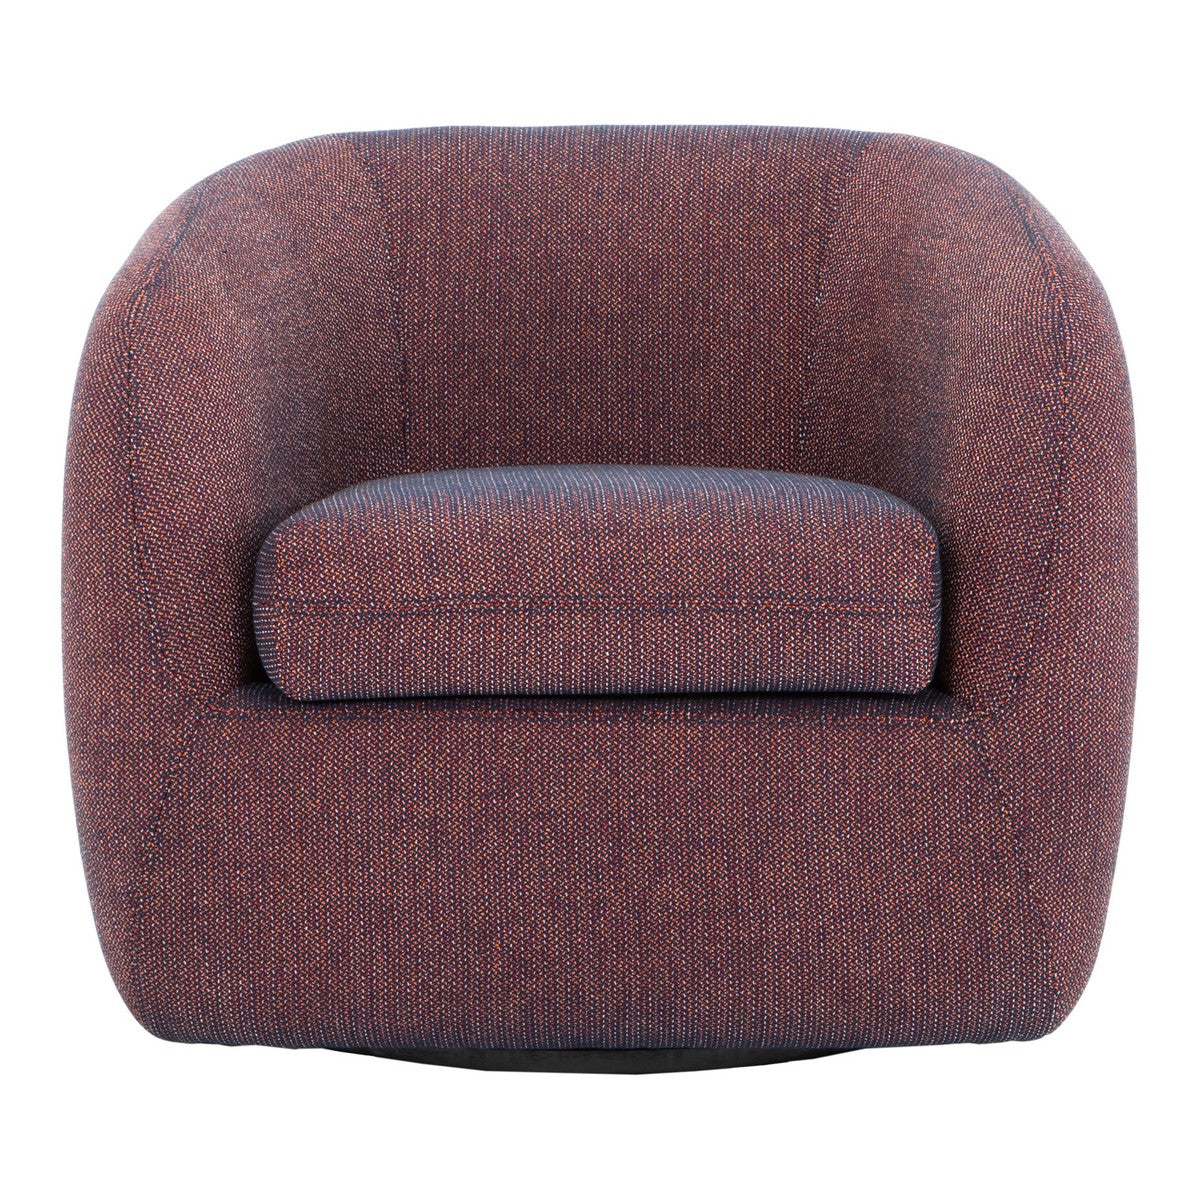 Moe's Home Collection Maurice Swivel Chair Rosa Orange - JM-1003-12 - Moe's Home Collection - lounge chairs - Minimal And Modern - 1